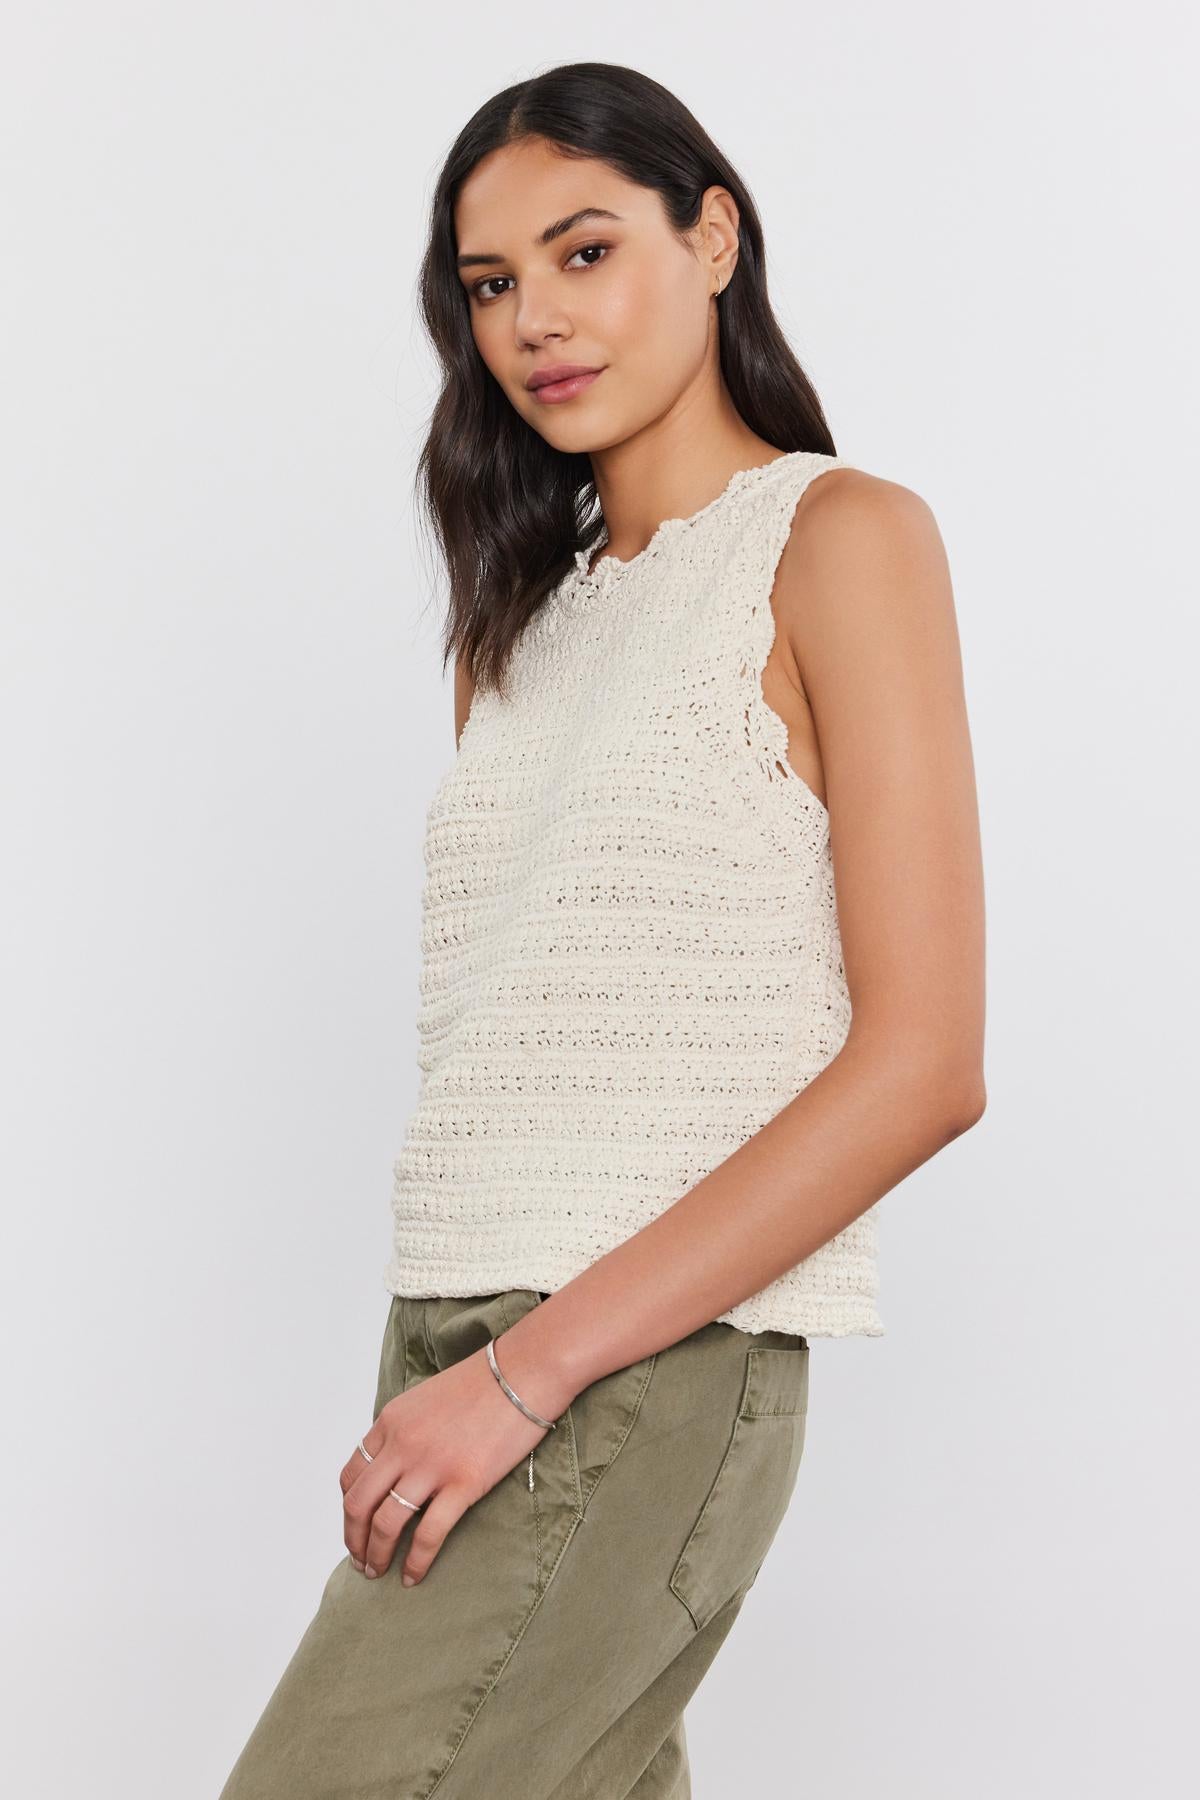 A woman with long dark hair wears an off-white Velvet by Graham & Spencer SOPHIE SWEATER VEST featuring scallop details and olive green pants, posing against a plain white background.-37054560436417